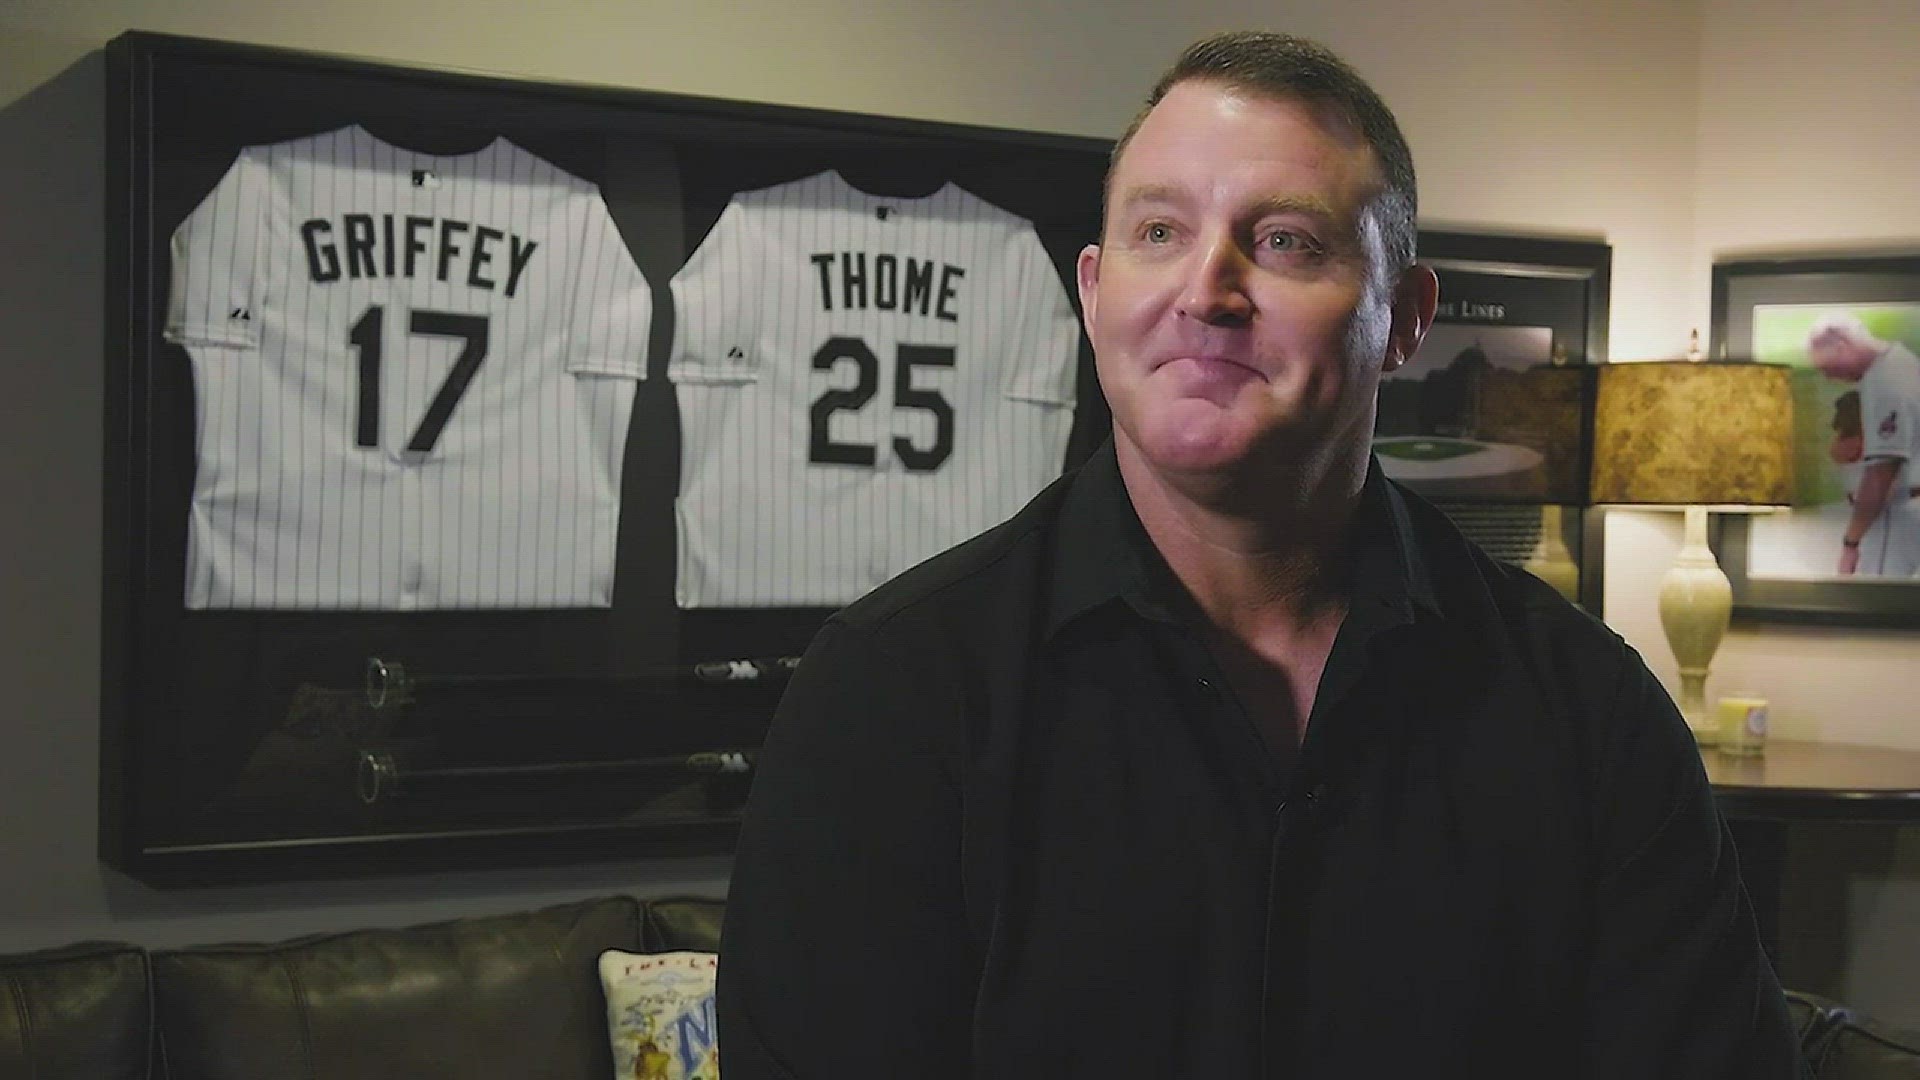 Former Phillies slugger Jim Thome voted into Baseball Hall of Fame - WHYY